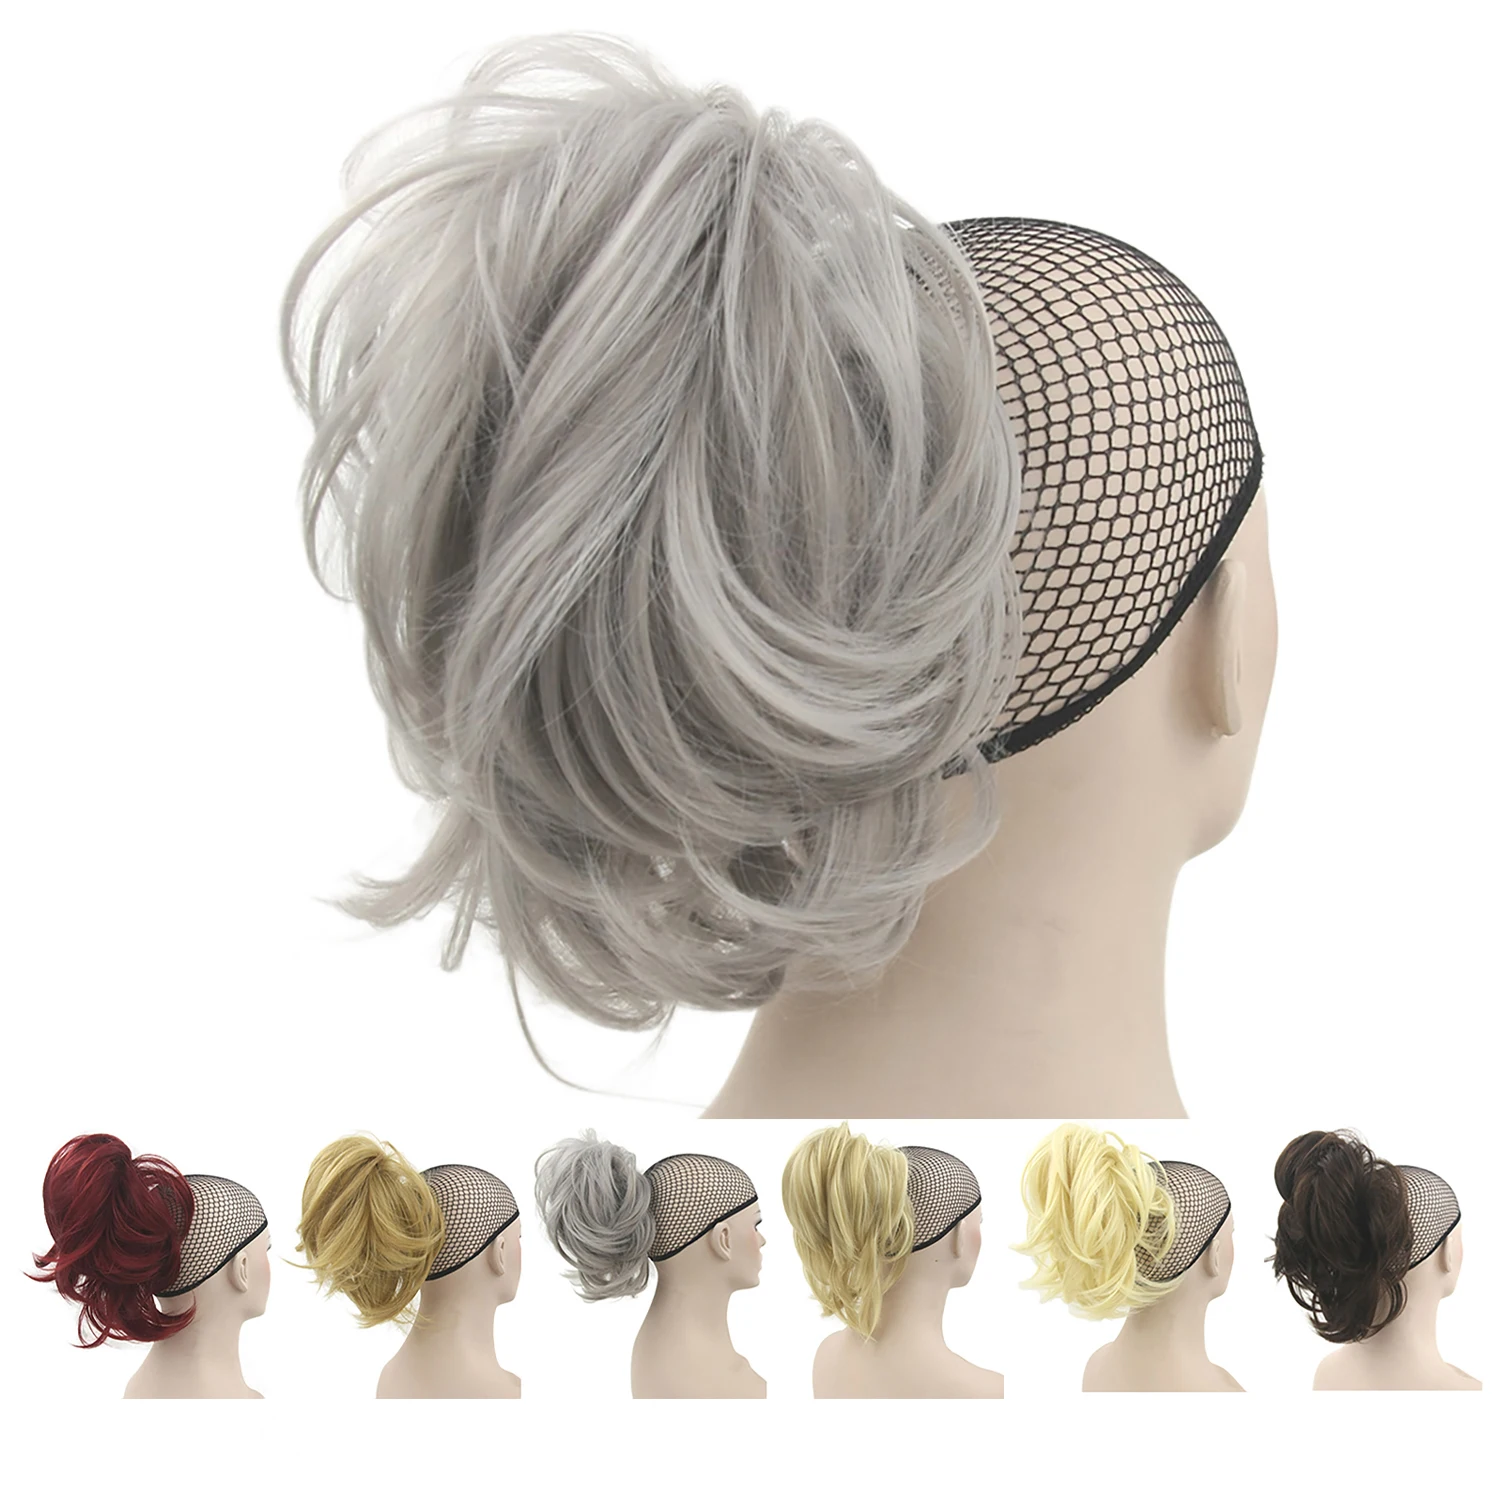 Soowee Short Curly Hair Piece Gray Claw Ponytail Synthetic Hair Blonde Clip In Hair Extensions Hairpiece Pony Tail